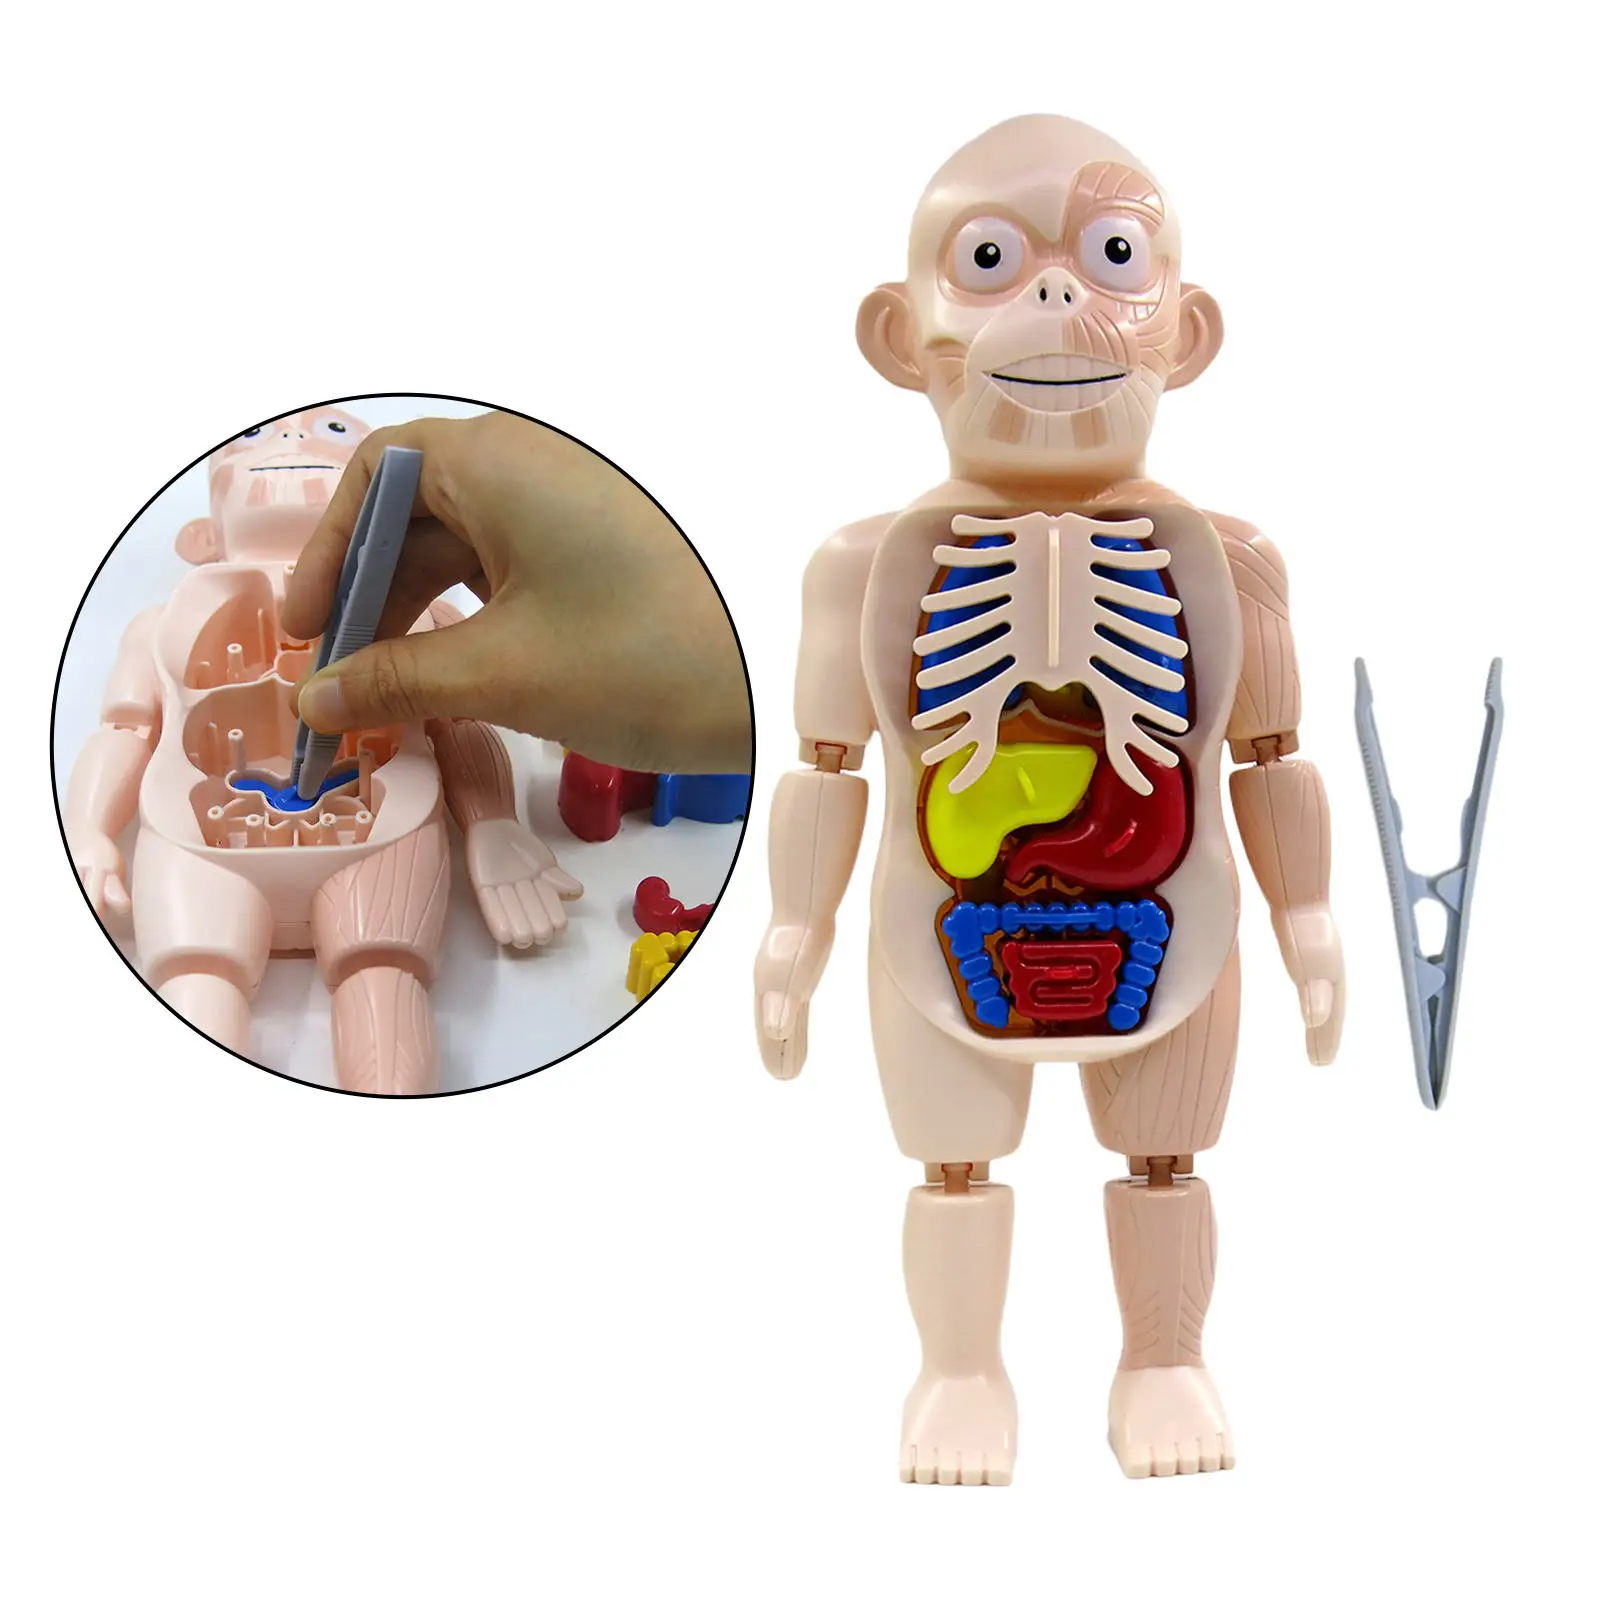 2X Realistic 3D Human Body Anatomy Learning Toys Kits for Lessons